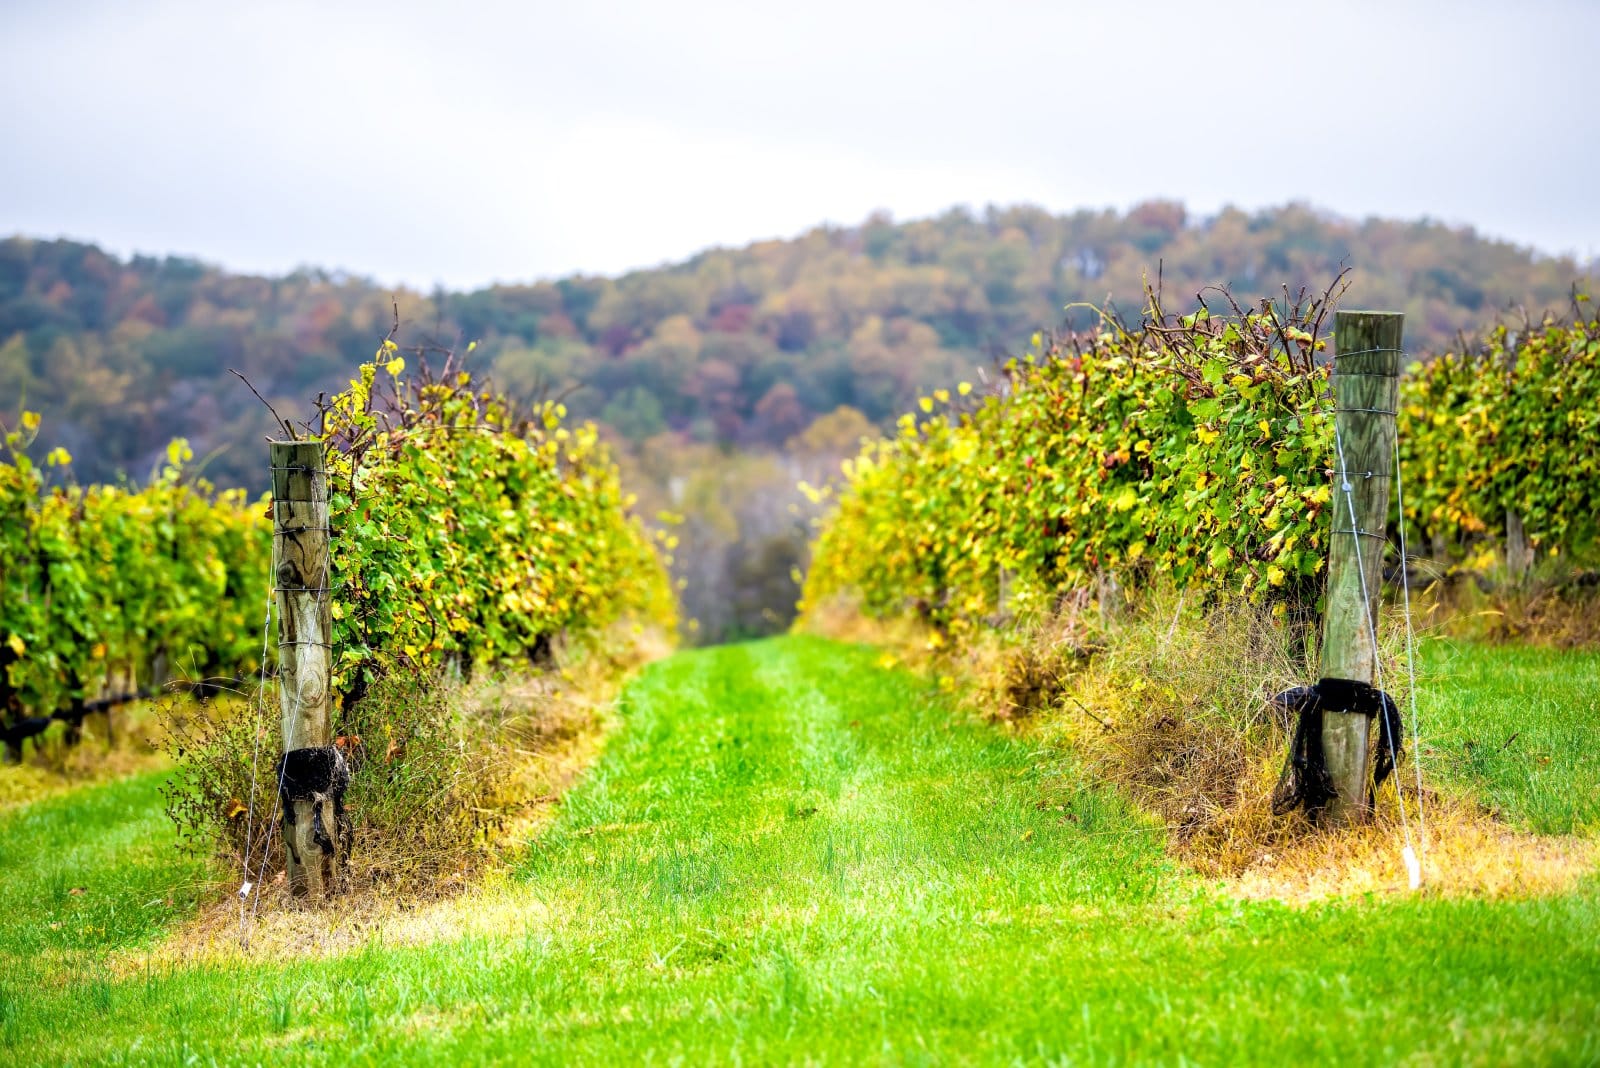 <p class="wp-caption-text">Image Credit: Shutterstock / Andriy Blokhin</p>  <p><span>Tour the vineyards and taste the state’s finest wines in picturesque settings. Whether you’re looking for a luxurious day out or a simple picnic among the vines, Virginia’s wine country delivers.</span></p>